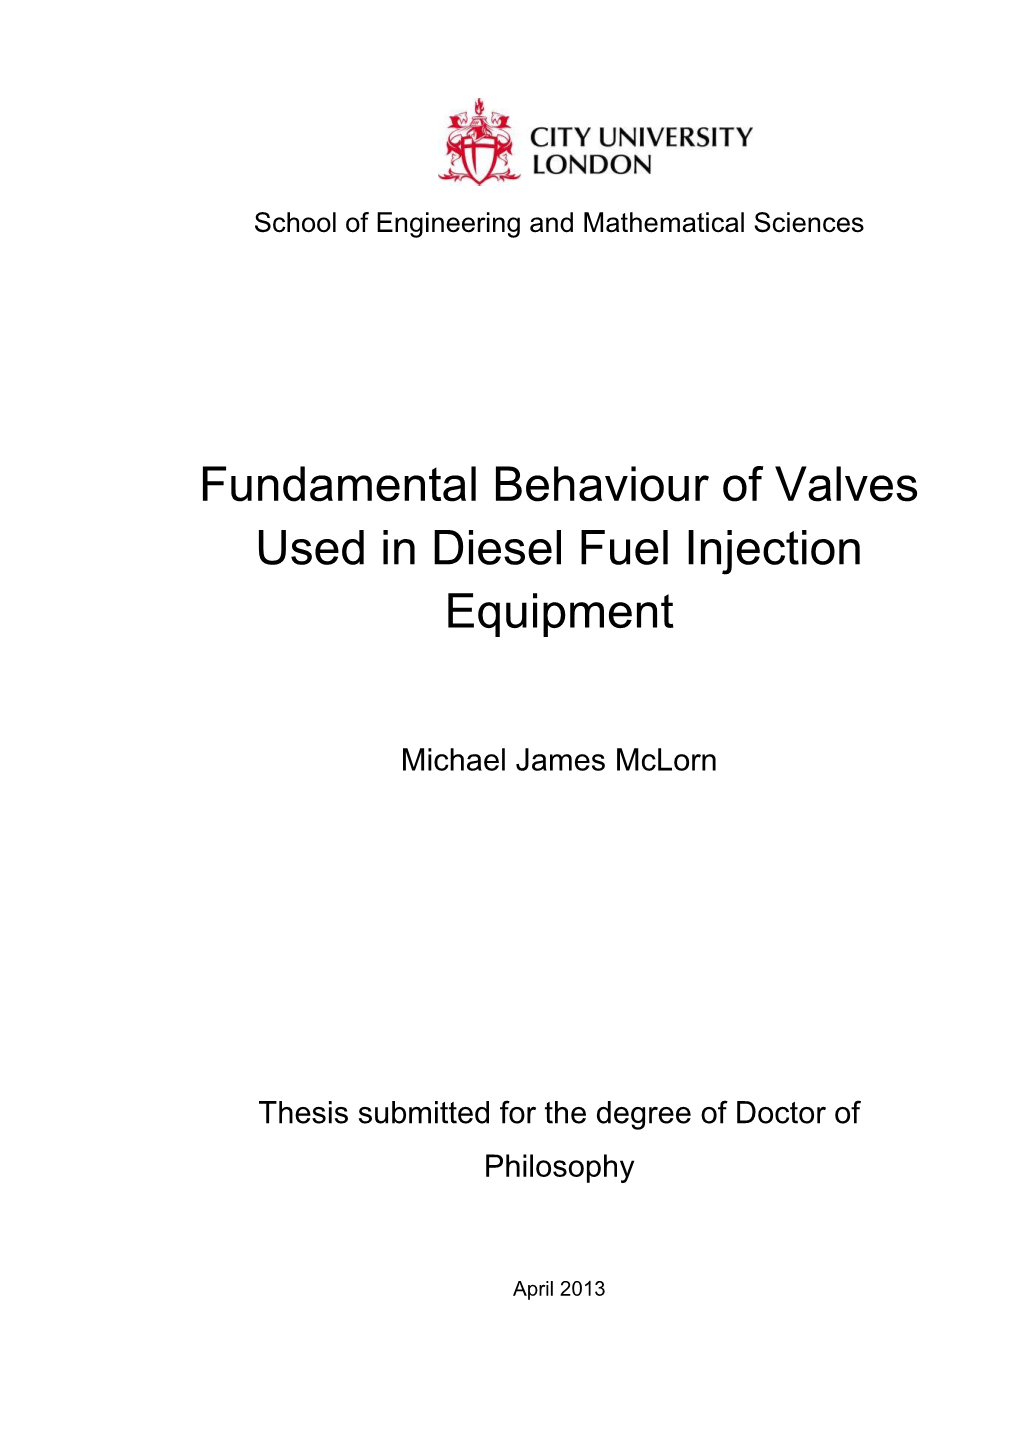 Fundamental Behaviour of Valves Used in Diesel Fuel Injection Equipment